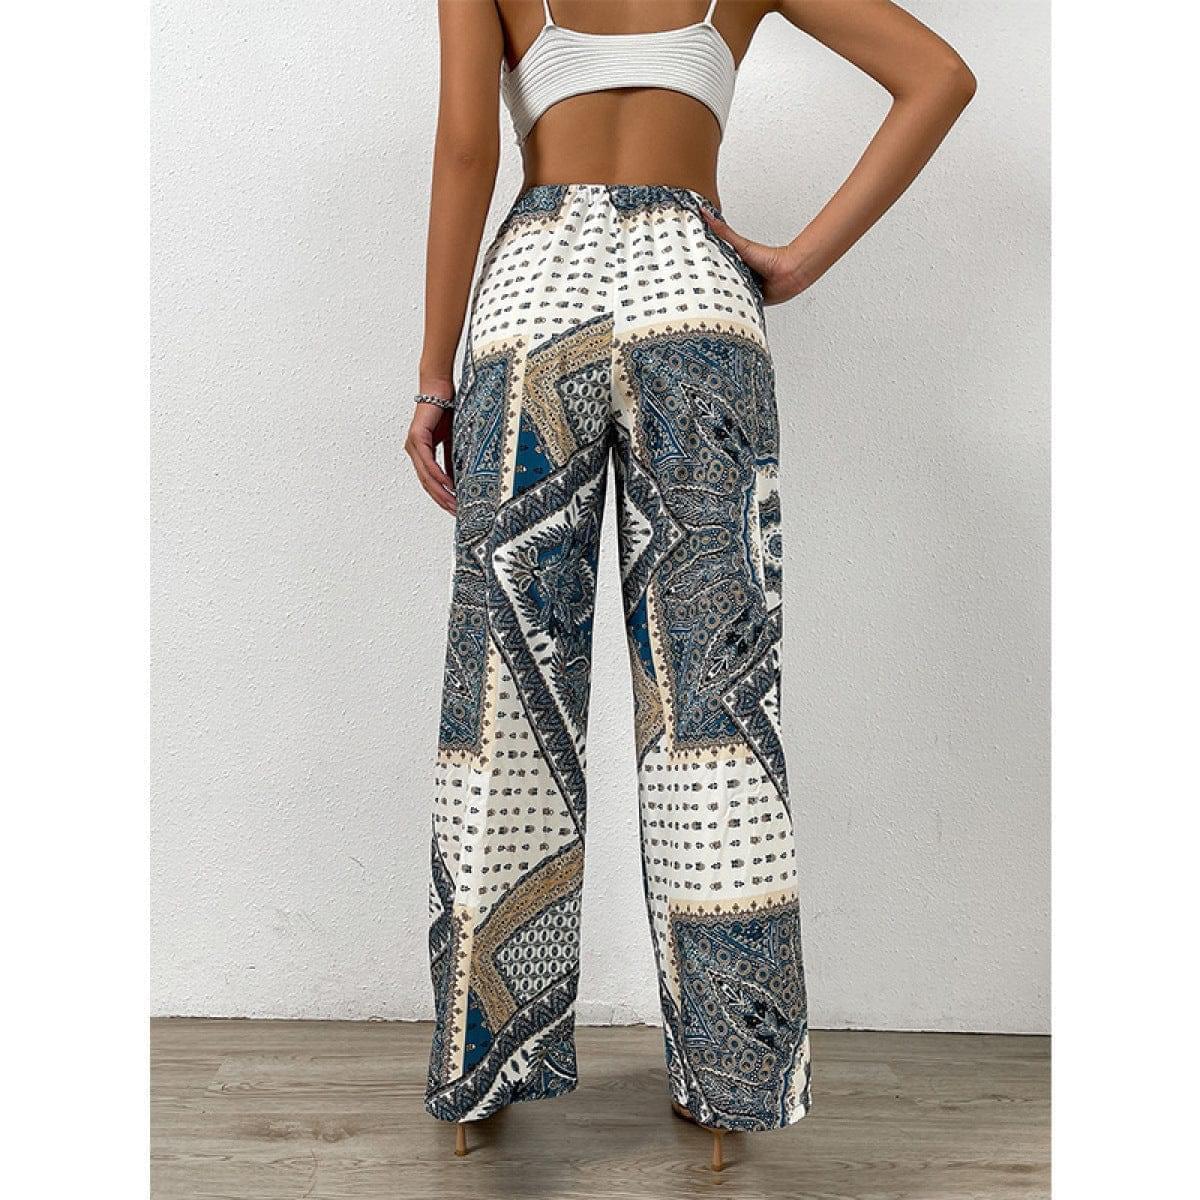 All Over Plants Print Tie Front High Waist Pants